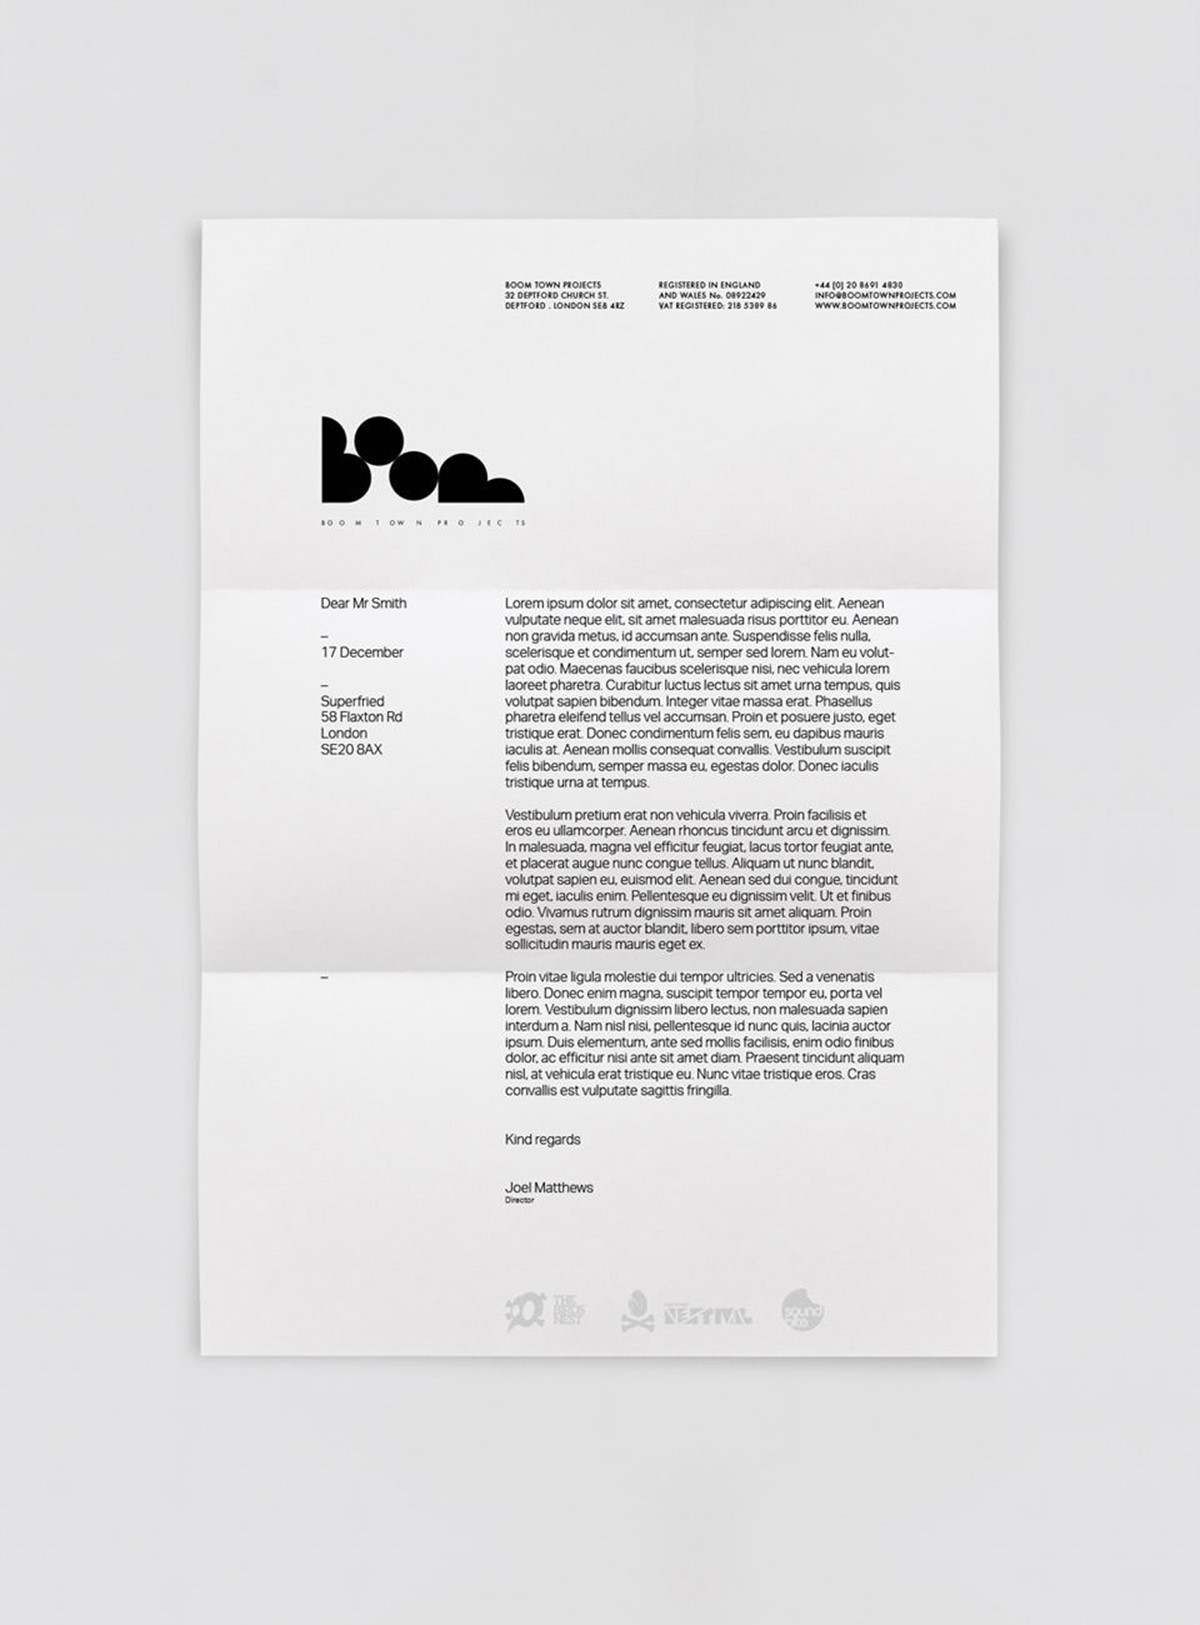 Boom Town Projects. Letterhead cards mock up. Brand identity design by Superfried.